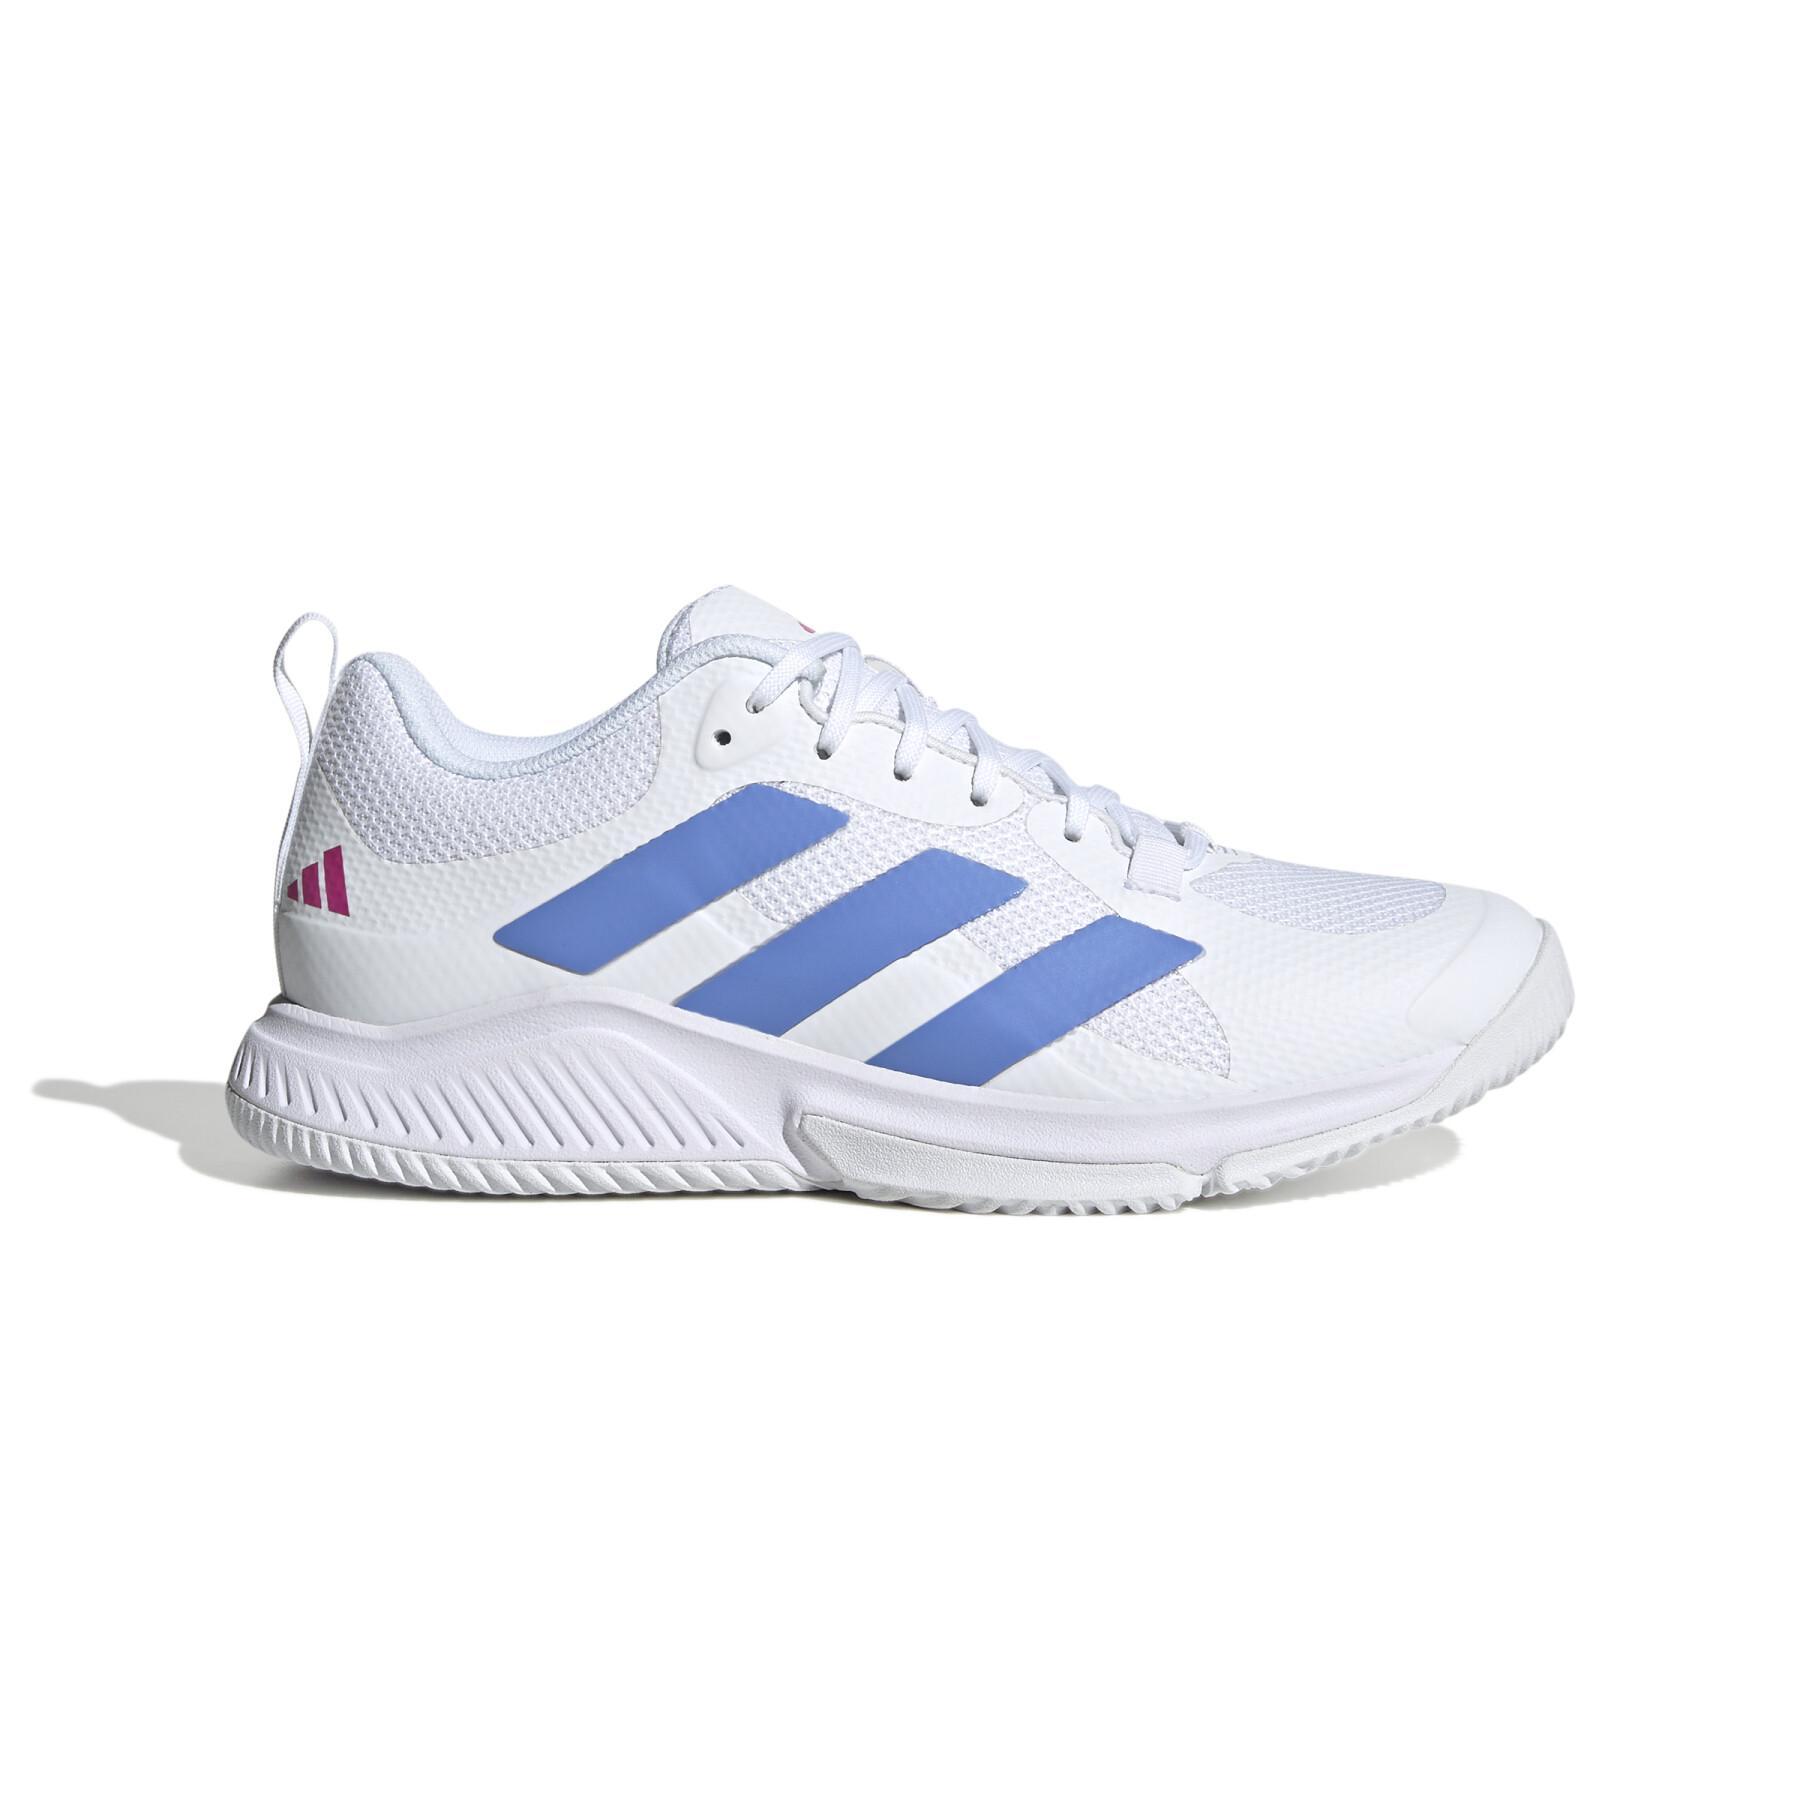 Shoes indoor woman adidas Court Team Bounce 2.0 - adidas - Shoes - Table